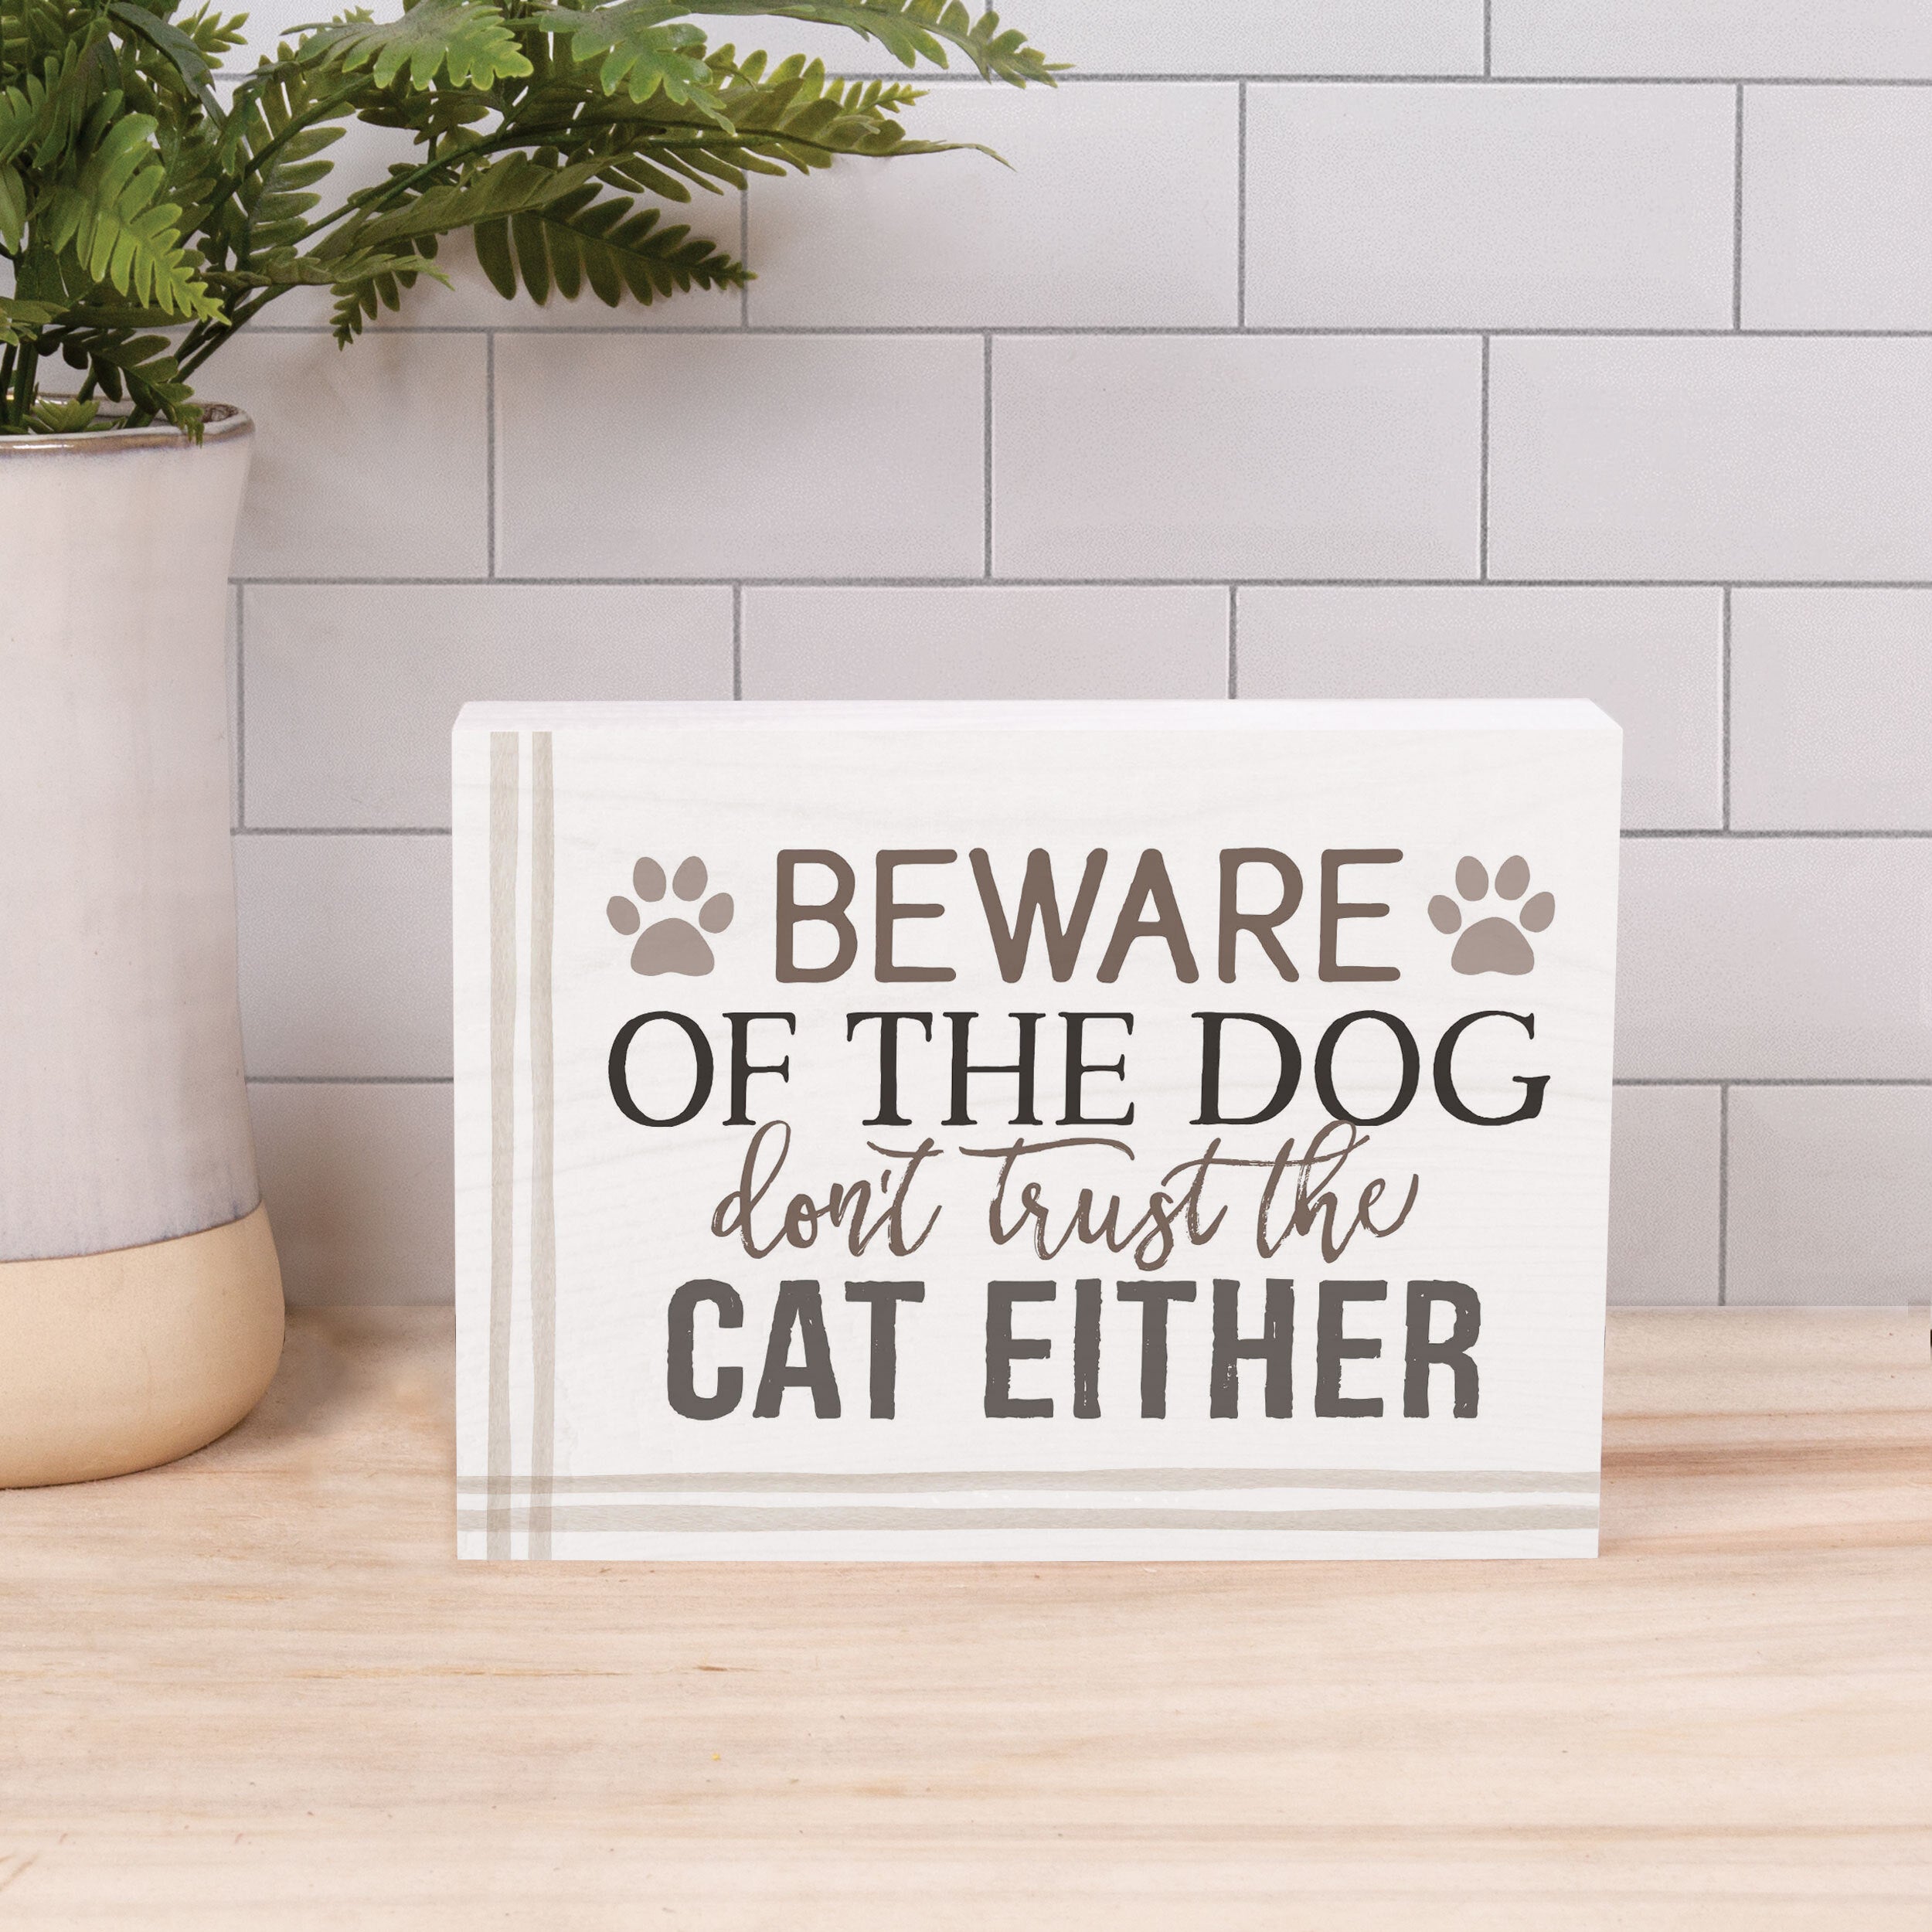 Beware Of The Dog. You Canâ€™t Trust The Cat Either Wood Block Décor